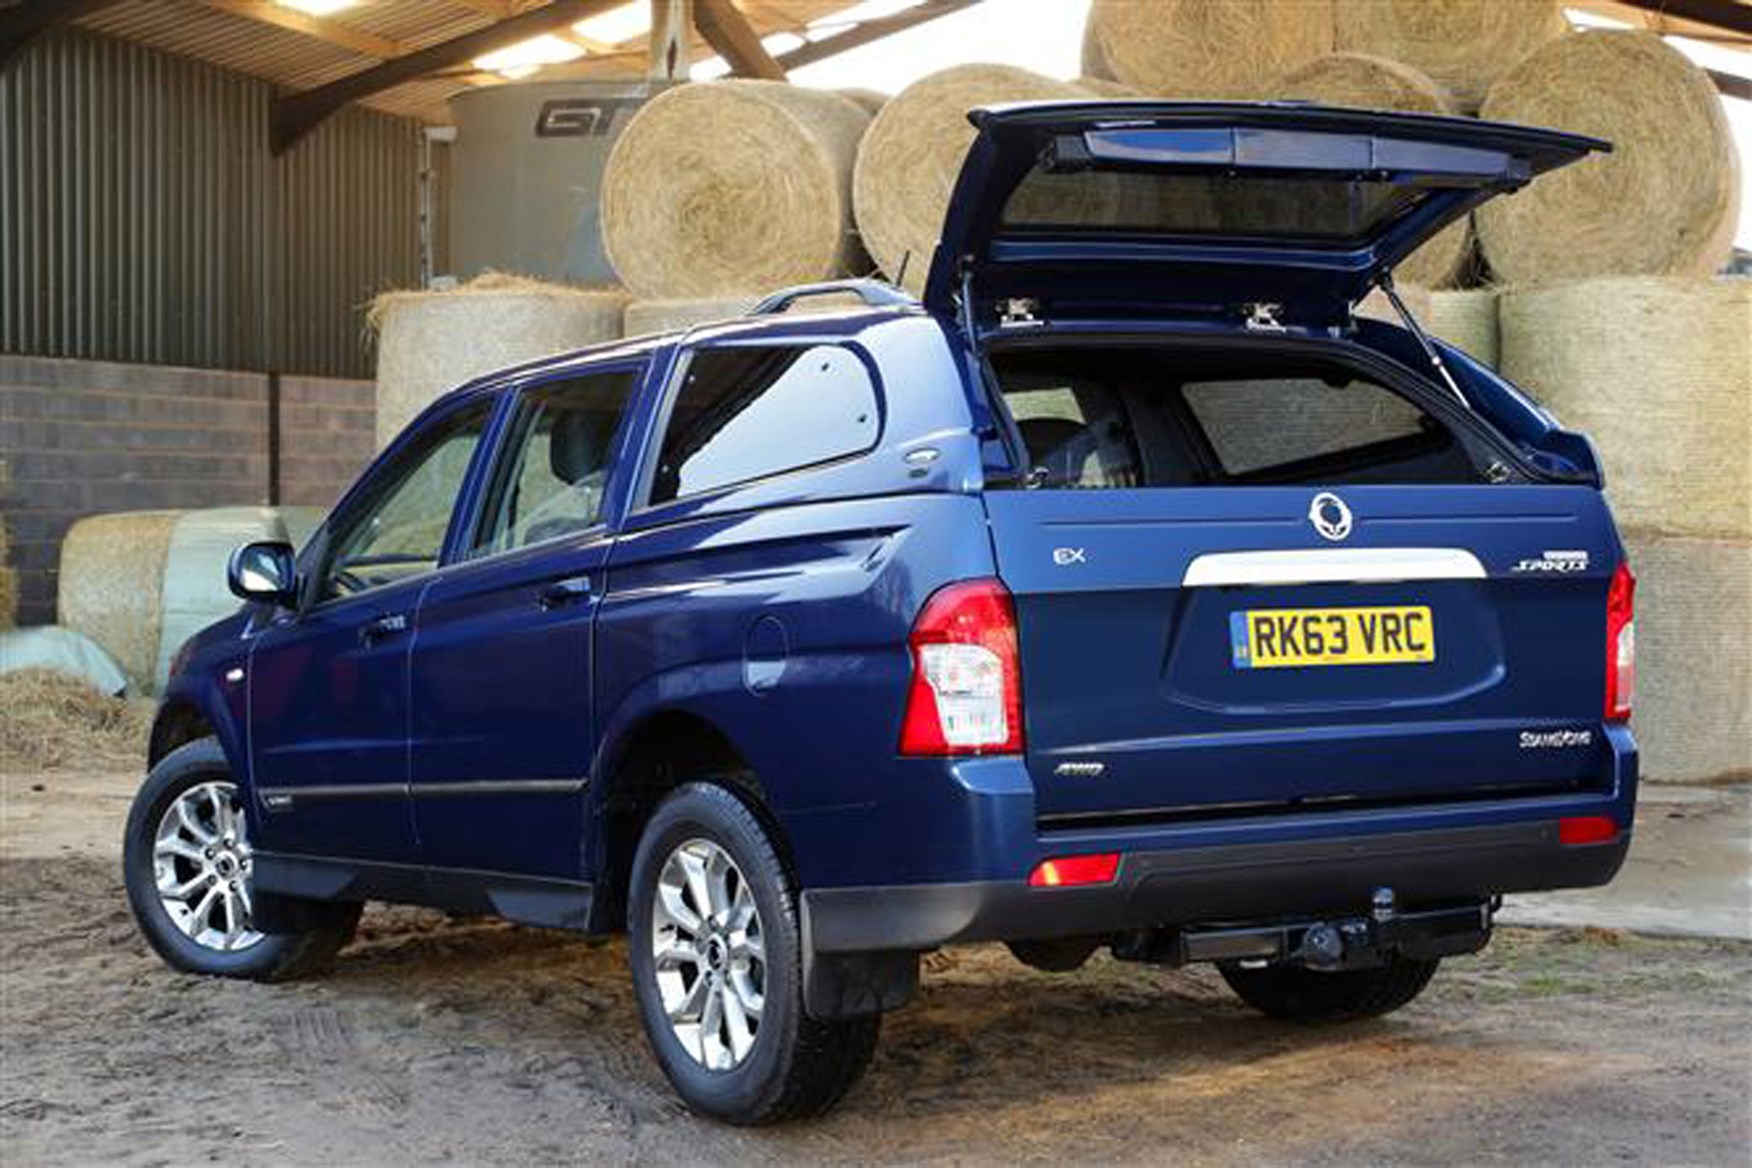 SsangYong Korando Sports review on Parkers Vans - load area access